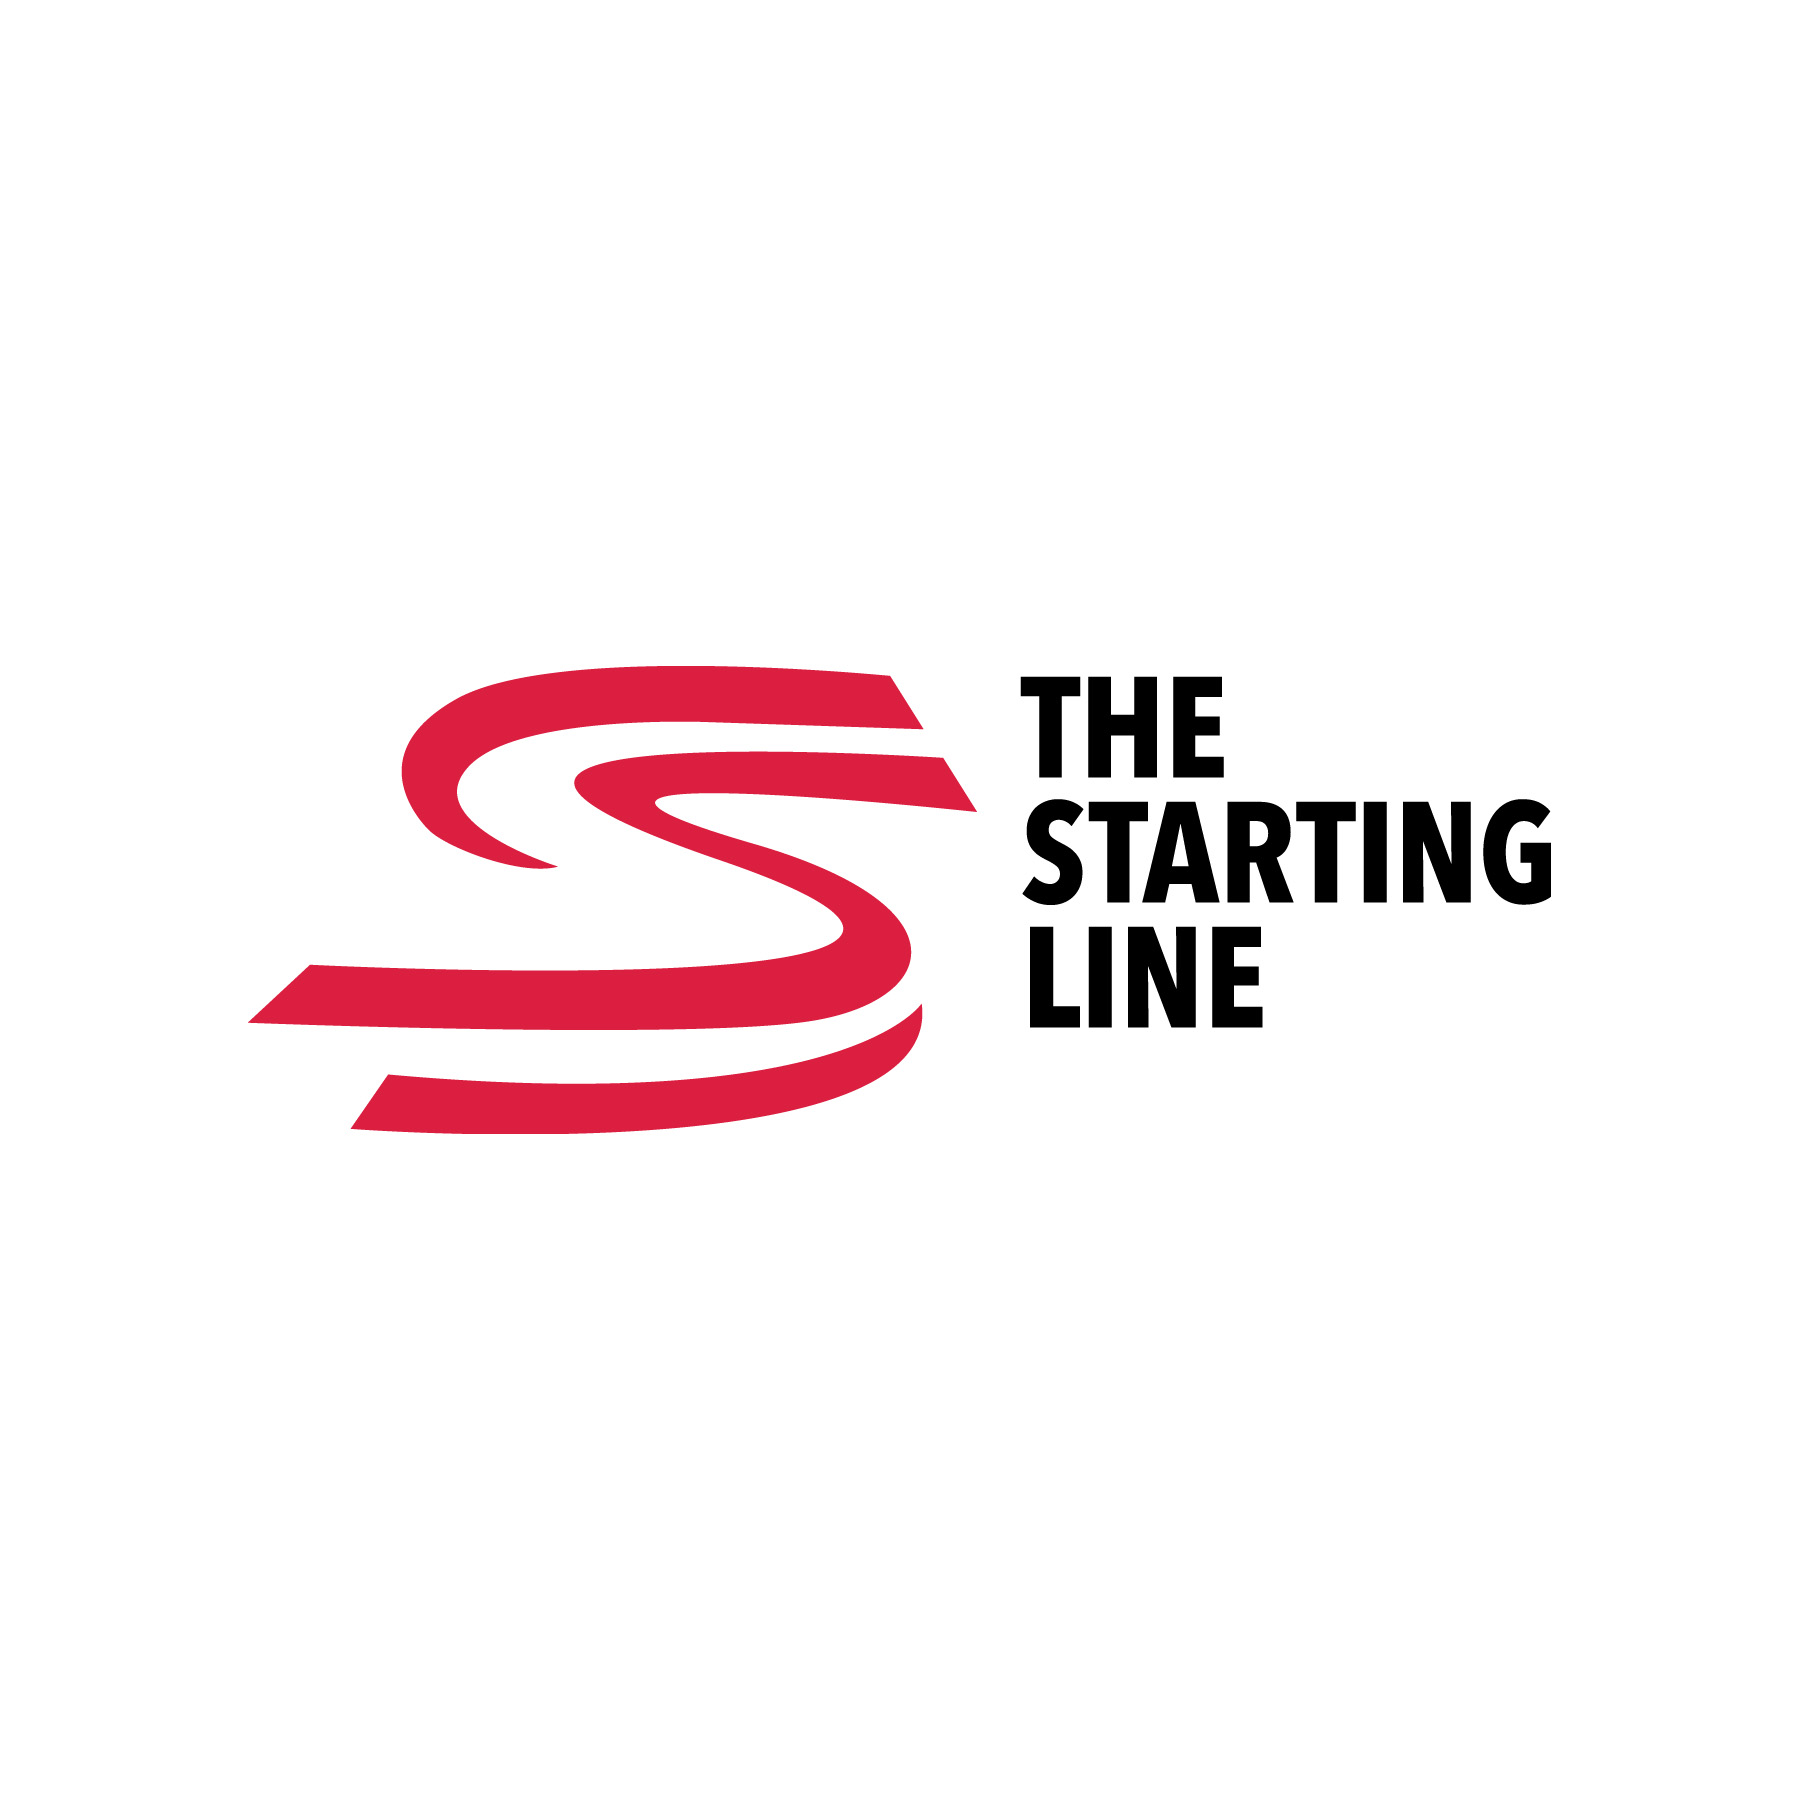 The Starting Line is a game powered by privilege.